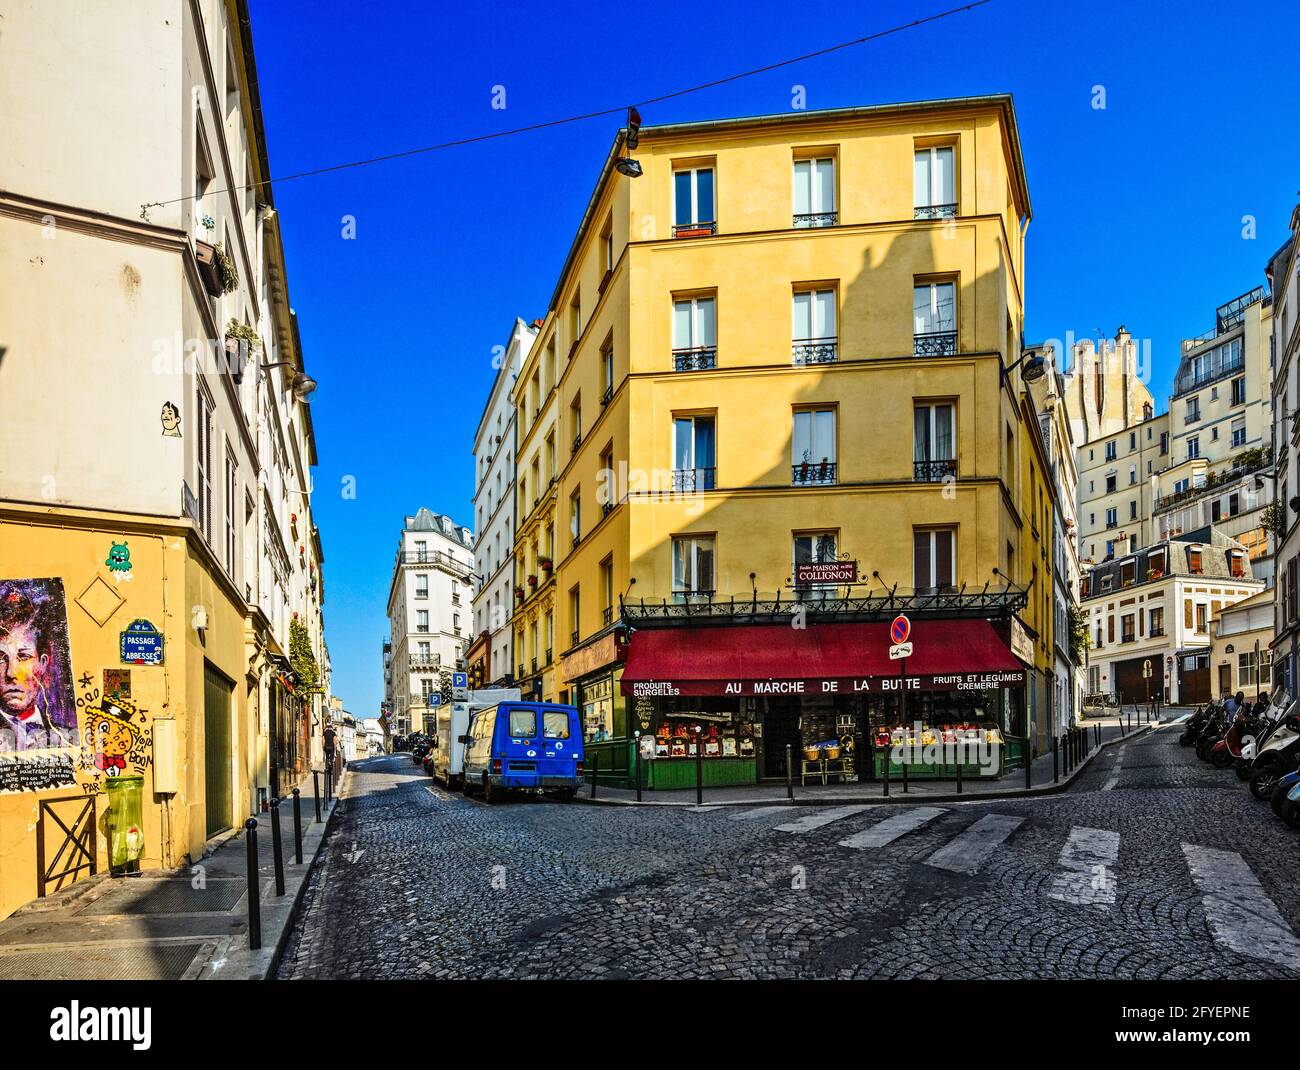 FRANCE. PARIS (75). RUE DES TROIS FRERES IN MONTMARTRE, IN FRONT OF THE GROCERY STORE 'COLLIGNON' FROM JEAN-PIERRE JEUNET'S 'AMELIE POULAIN' MOVIE Stock Photo